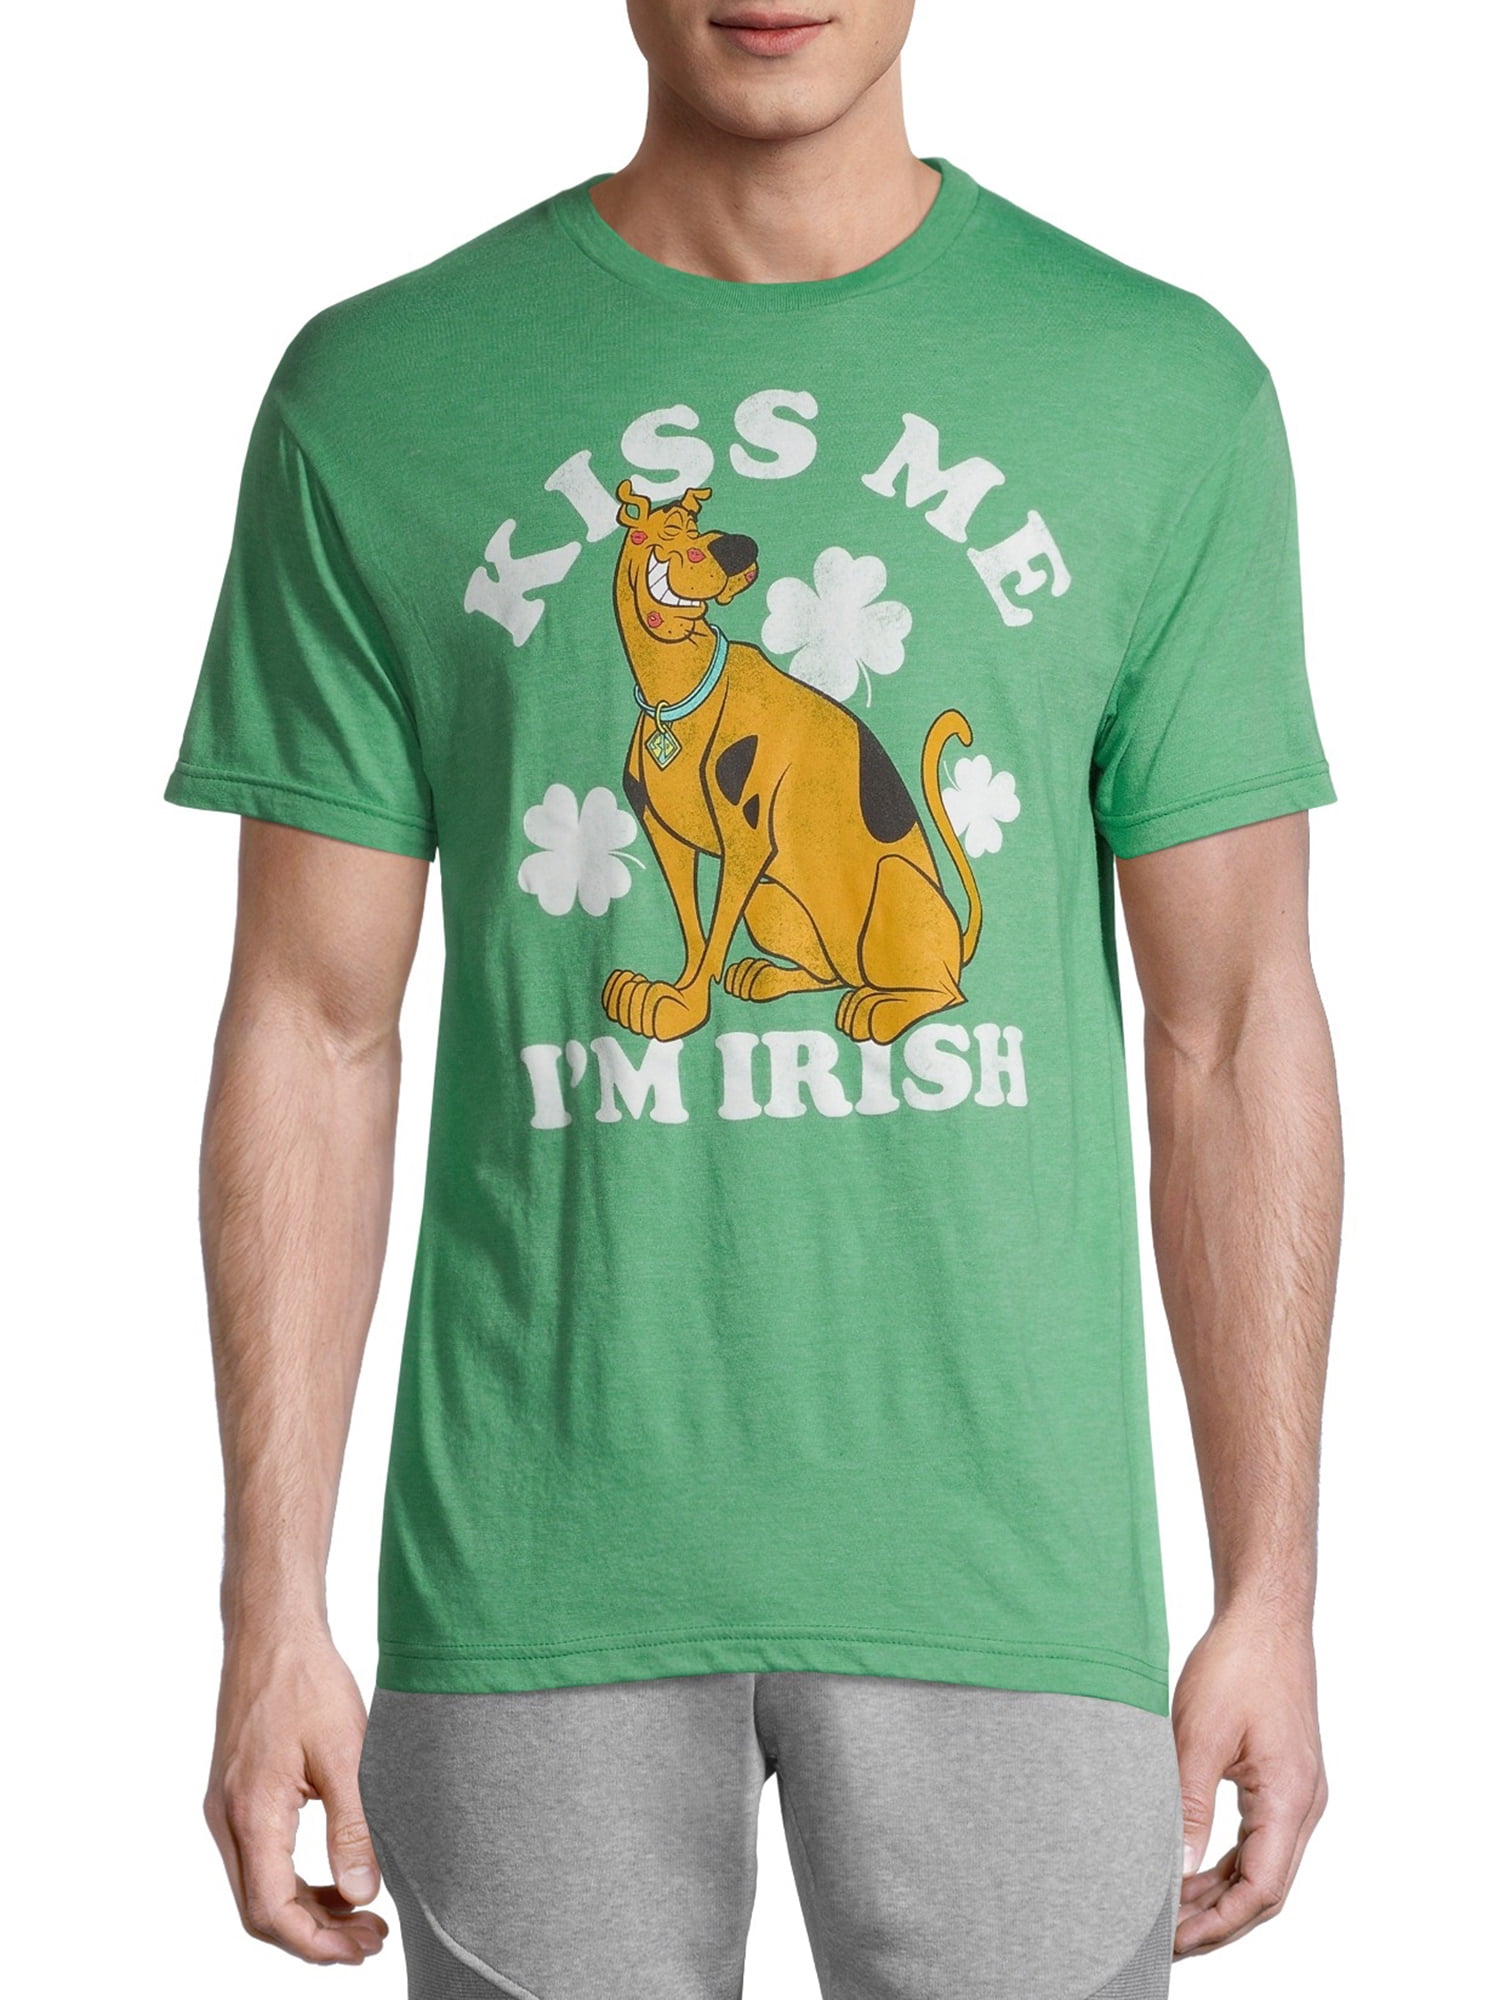 Patrick's Day T Shirt Holiday Gift Shirt WE CAN CUSTOMIZE With Any Saying Patrick's Day Shirt Funny St Kiss Me I'm A Nurse's Aide St